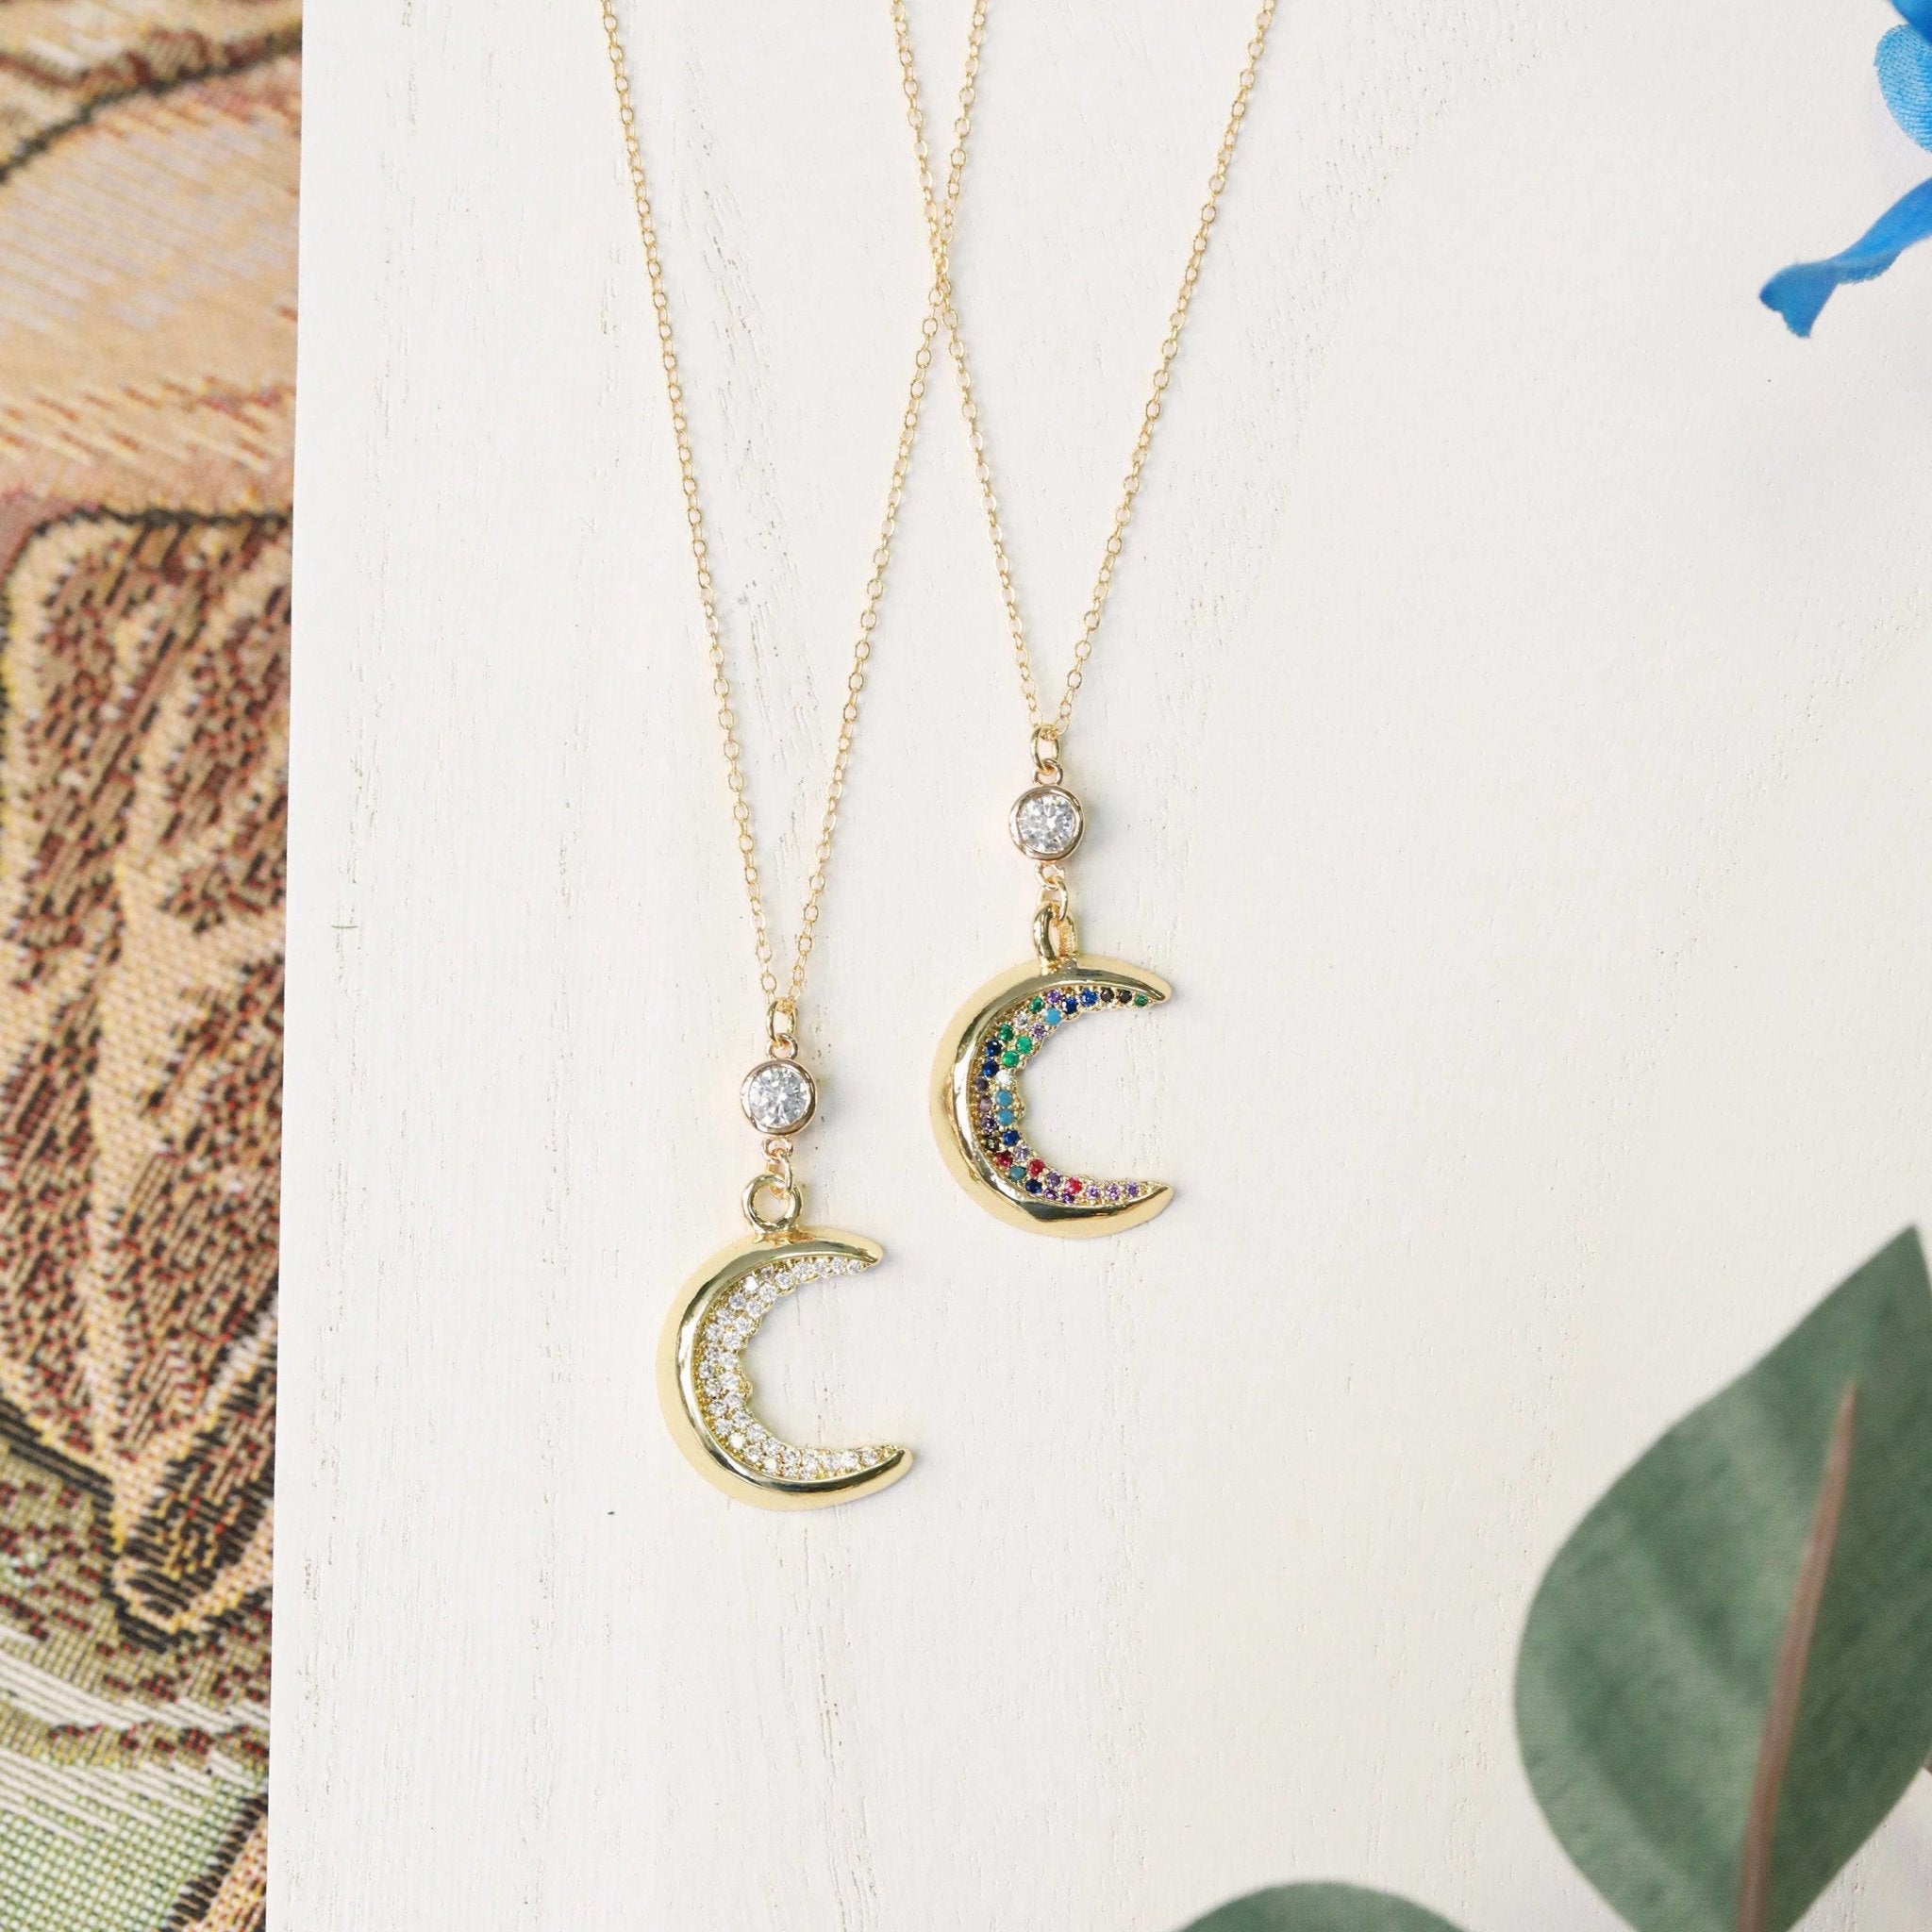 Crystal Crescent Moon Necklace - The Gilded Witch